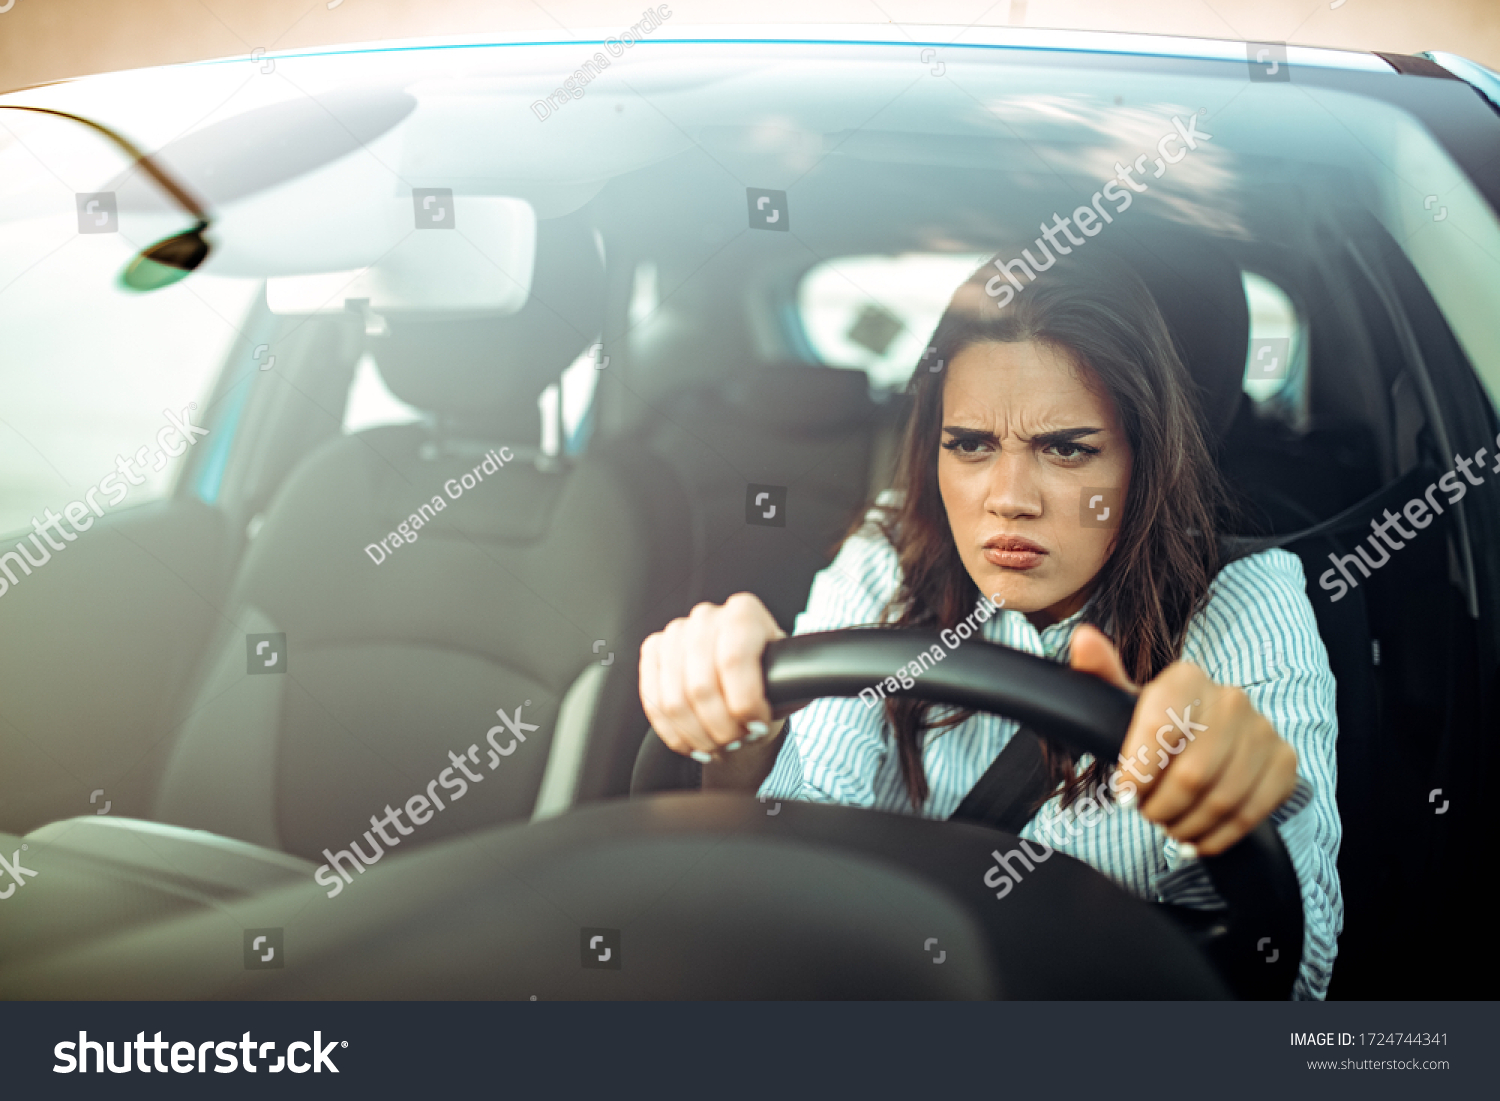 Road rage! Enraged young woman driver shouts and points accusingly.  Profile of an angry young driver. Negative human emotions face expression. Angry woman driving a car #1724744341